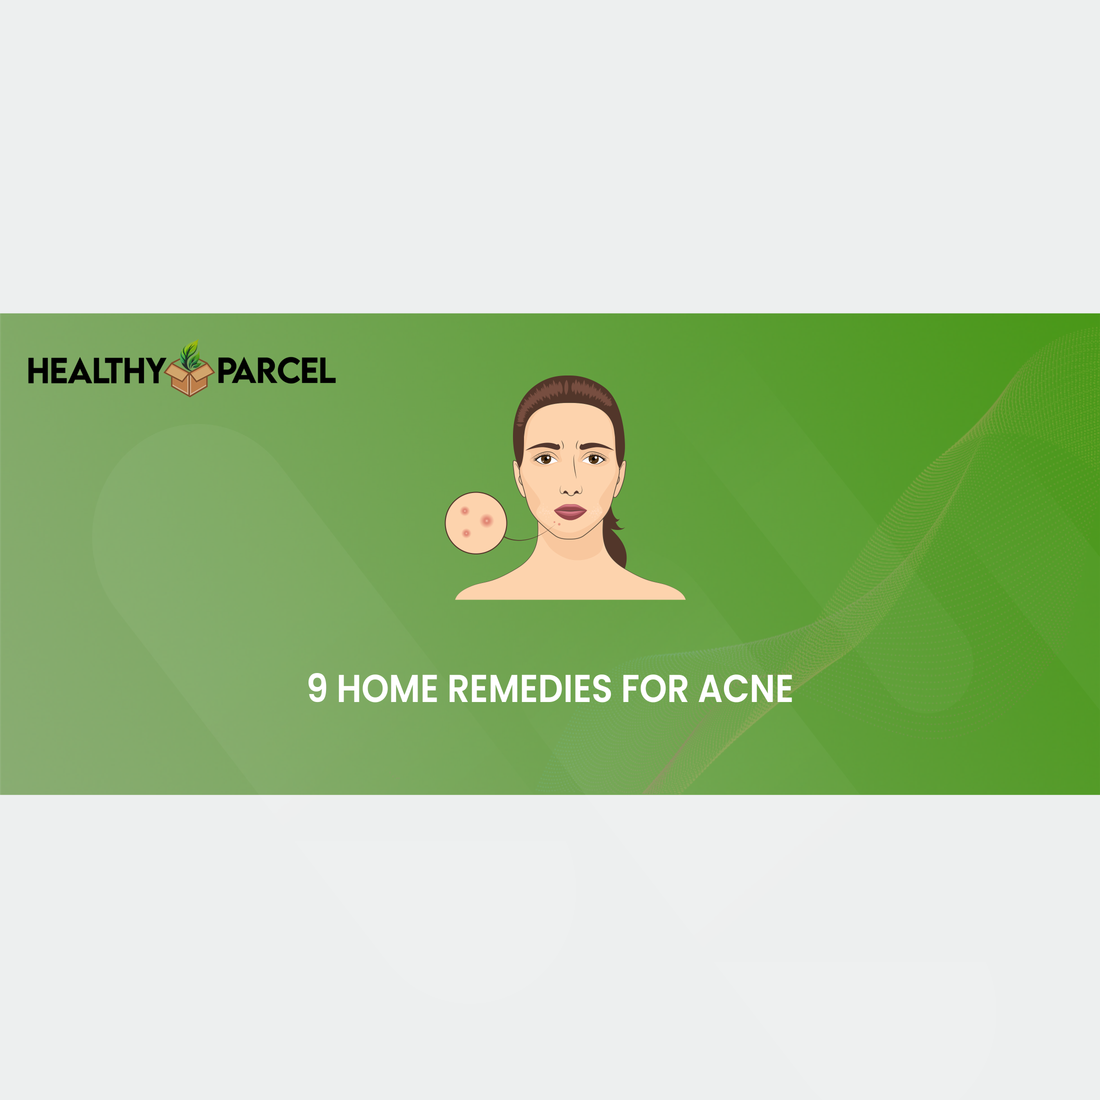 9 Home Remedies For Acne